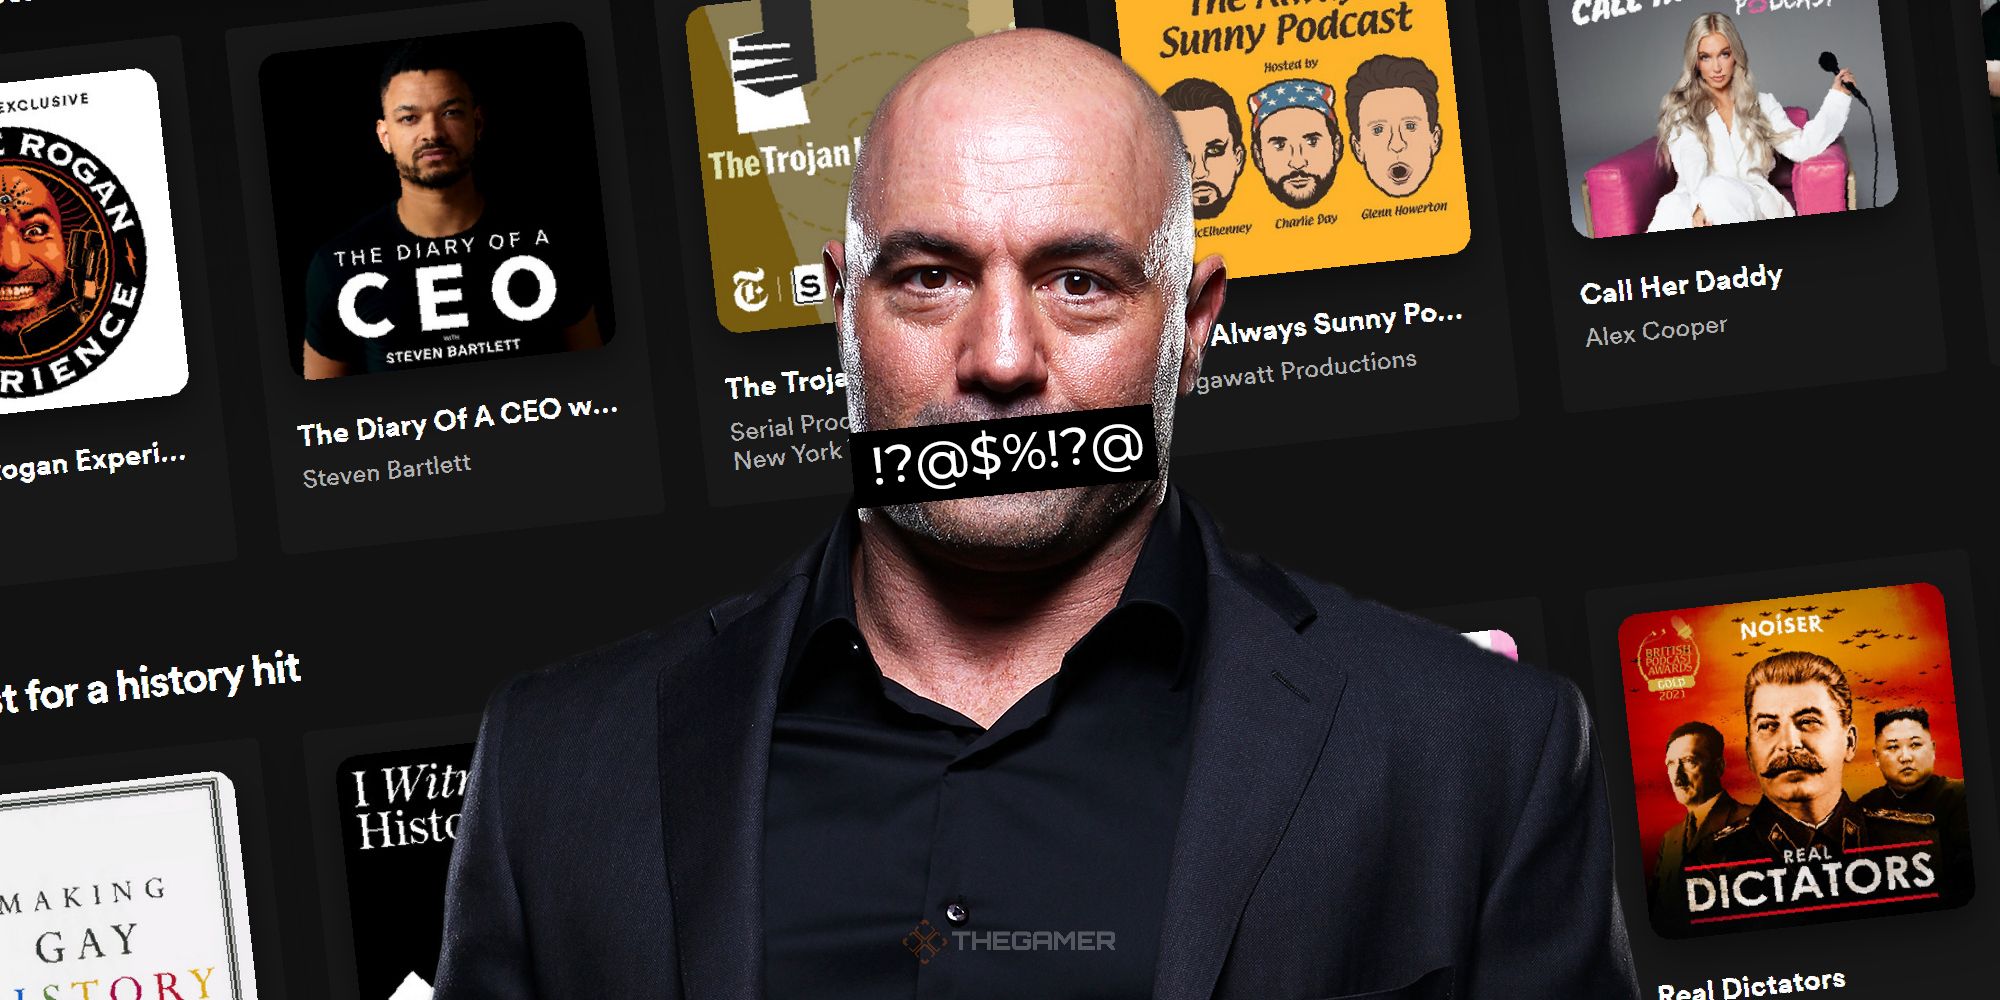 joe rogan in front of spotify podcasts with expletive symbols covering his mouth